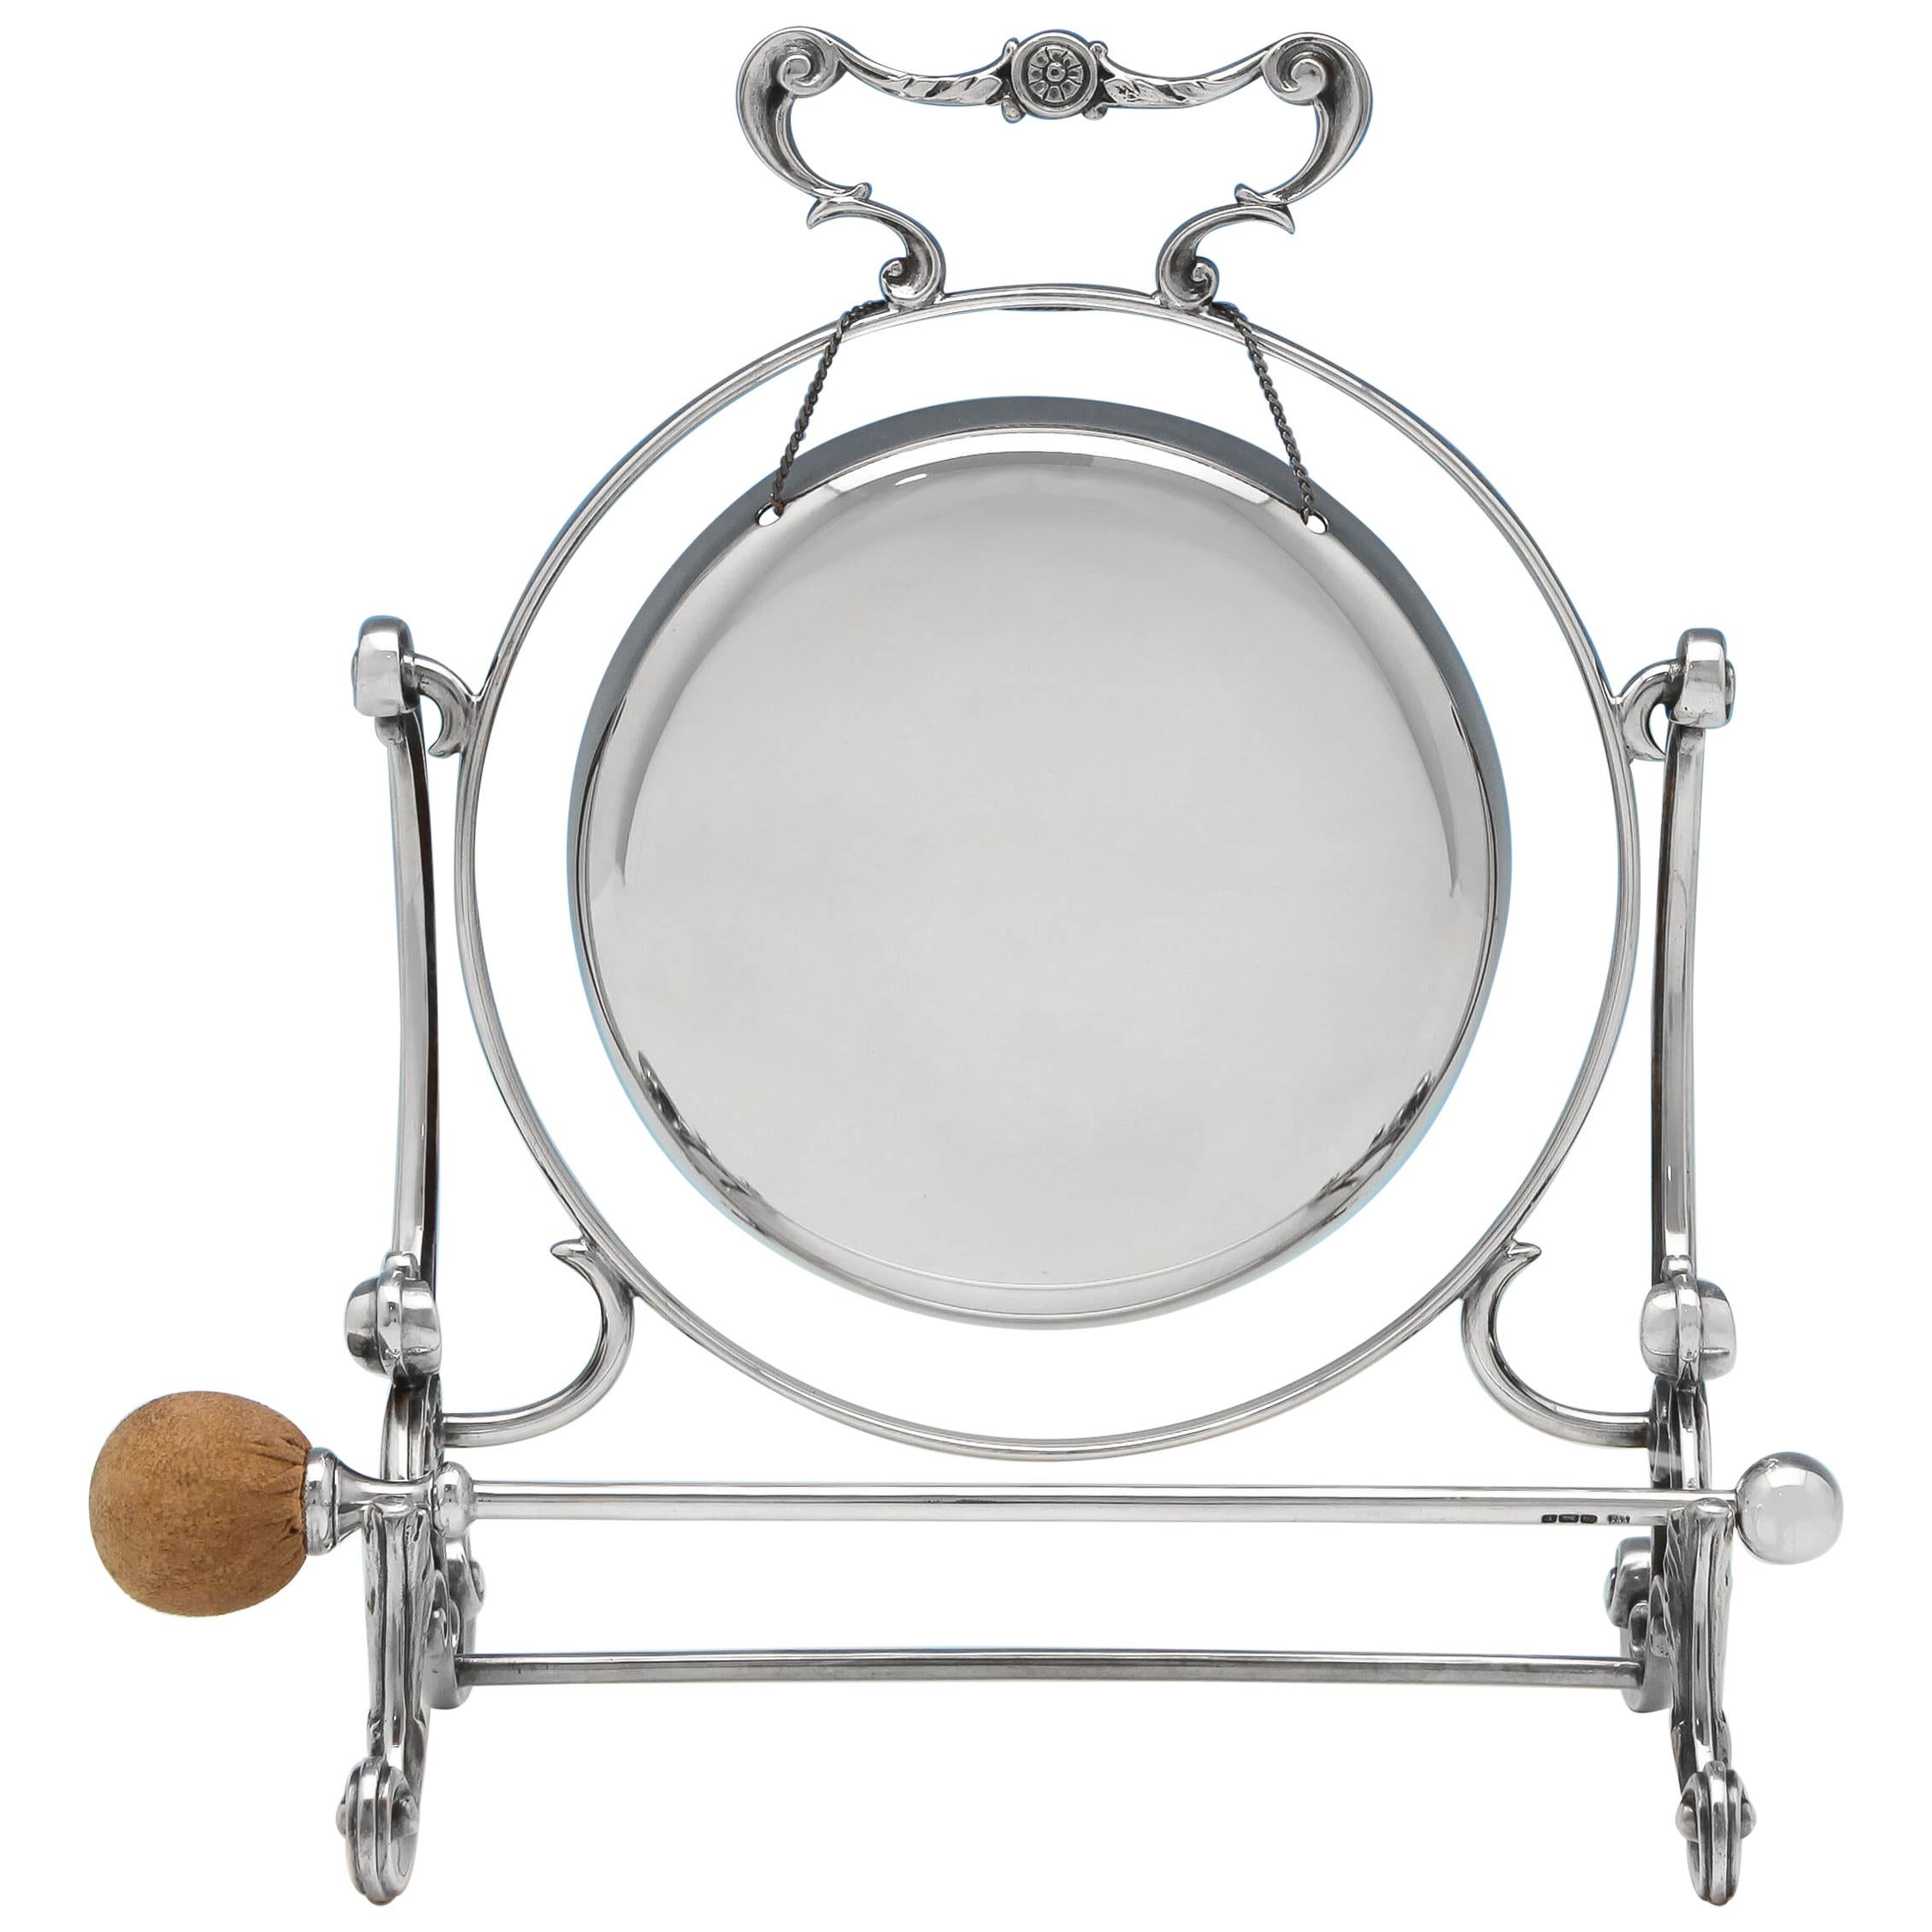 Edwardian Sterling Silver Gong from 1909 by Fenton Brothers